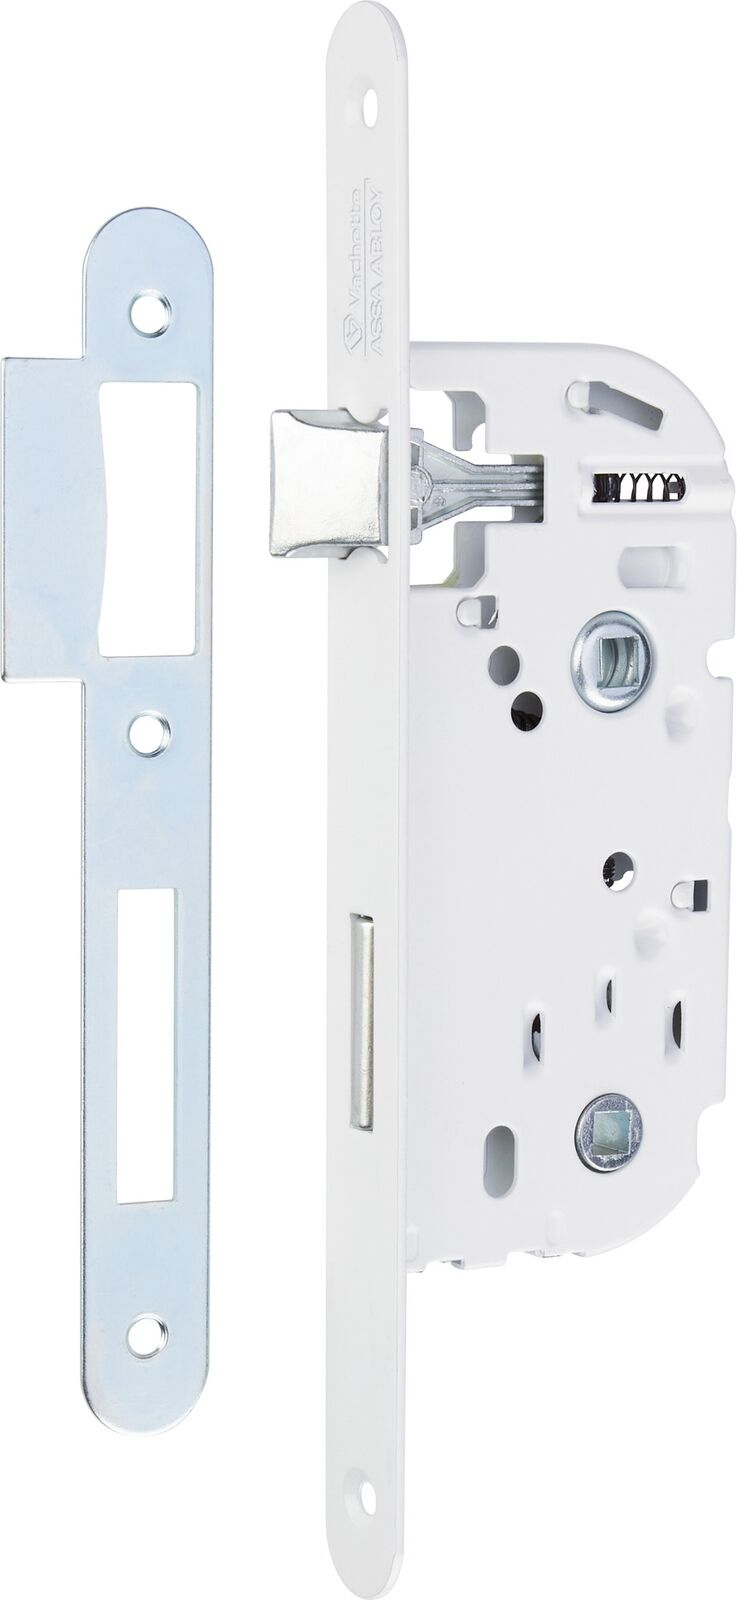 White mortice lock, 135 mm lock, 40 mm axis